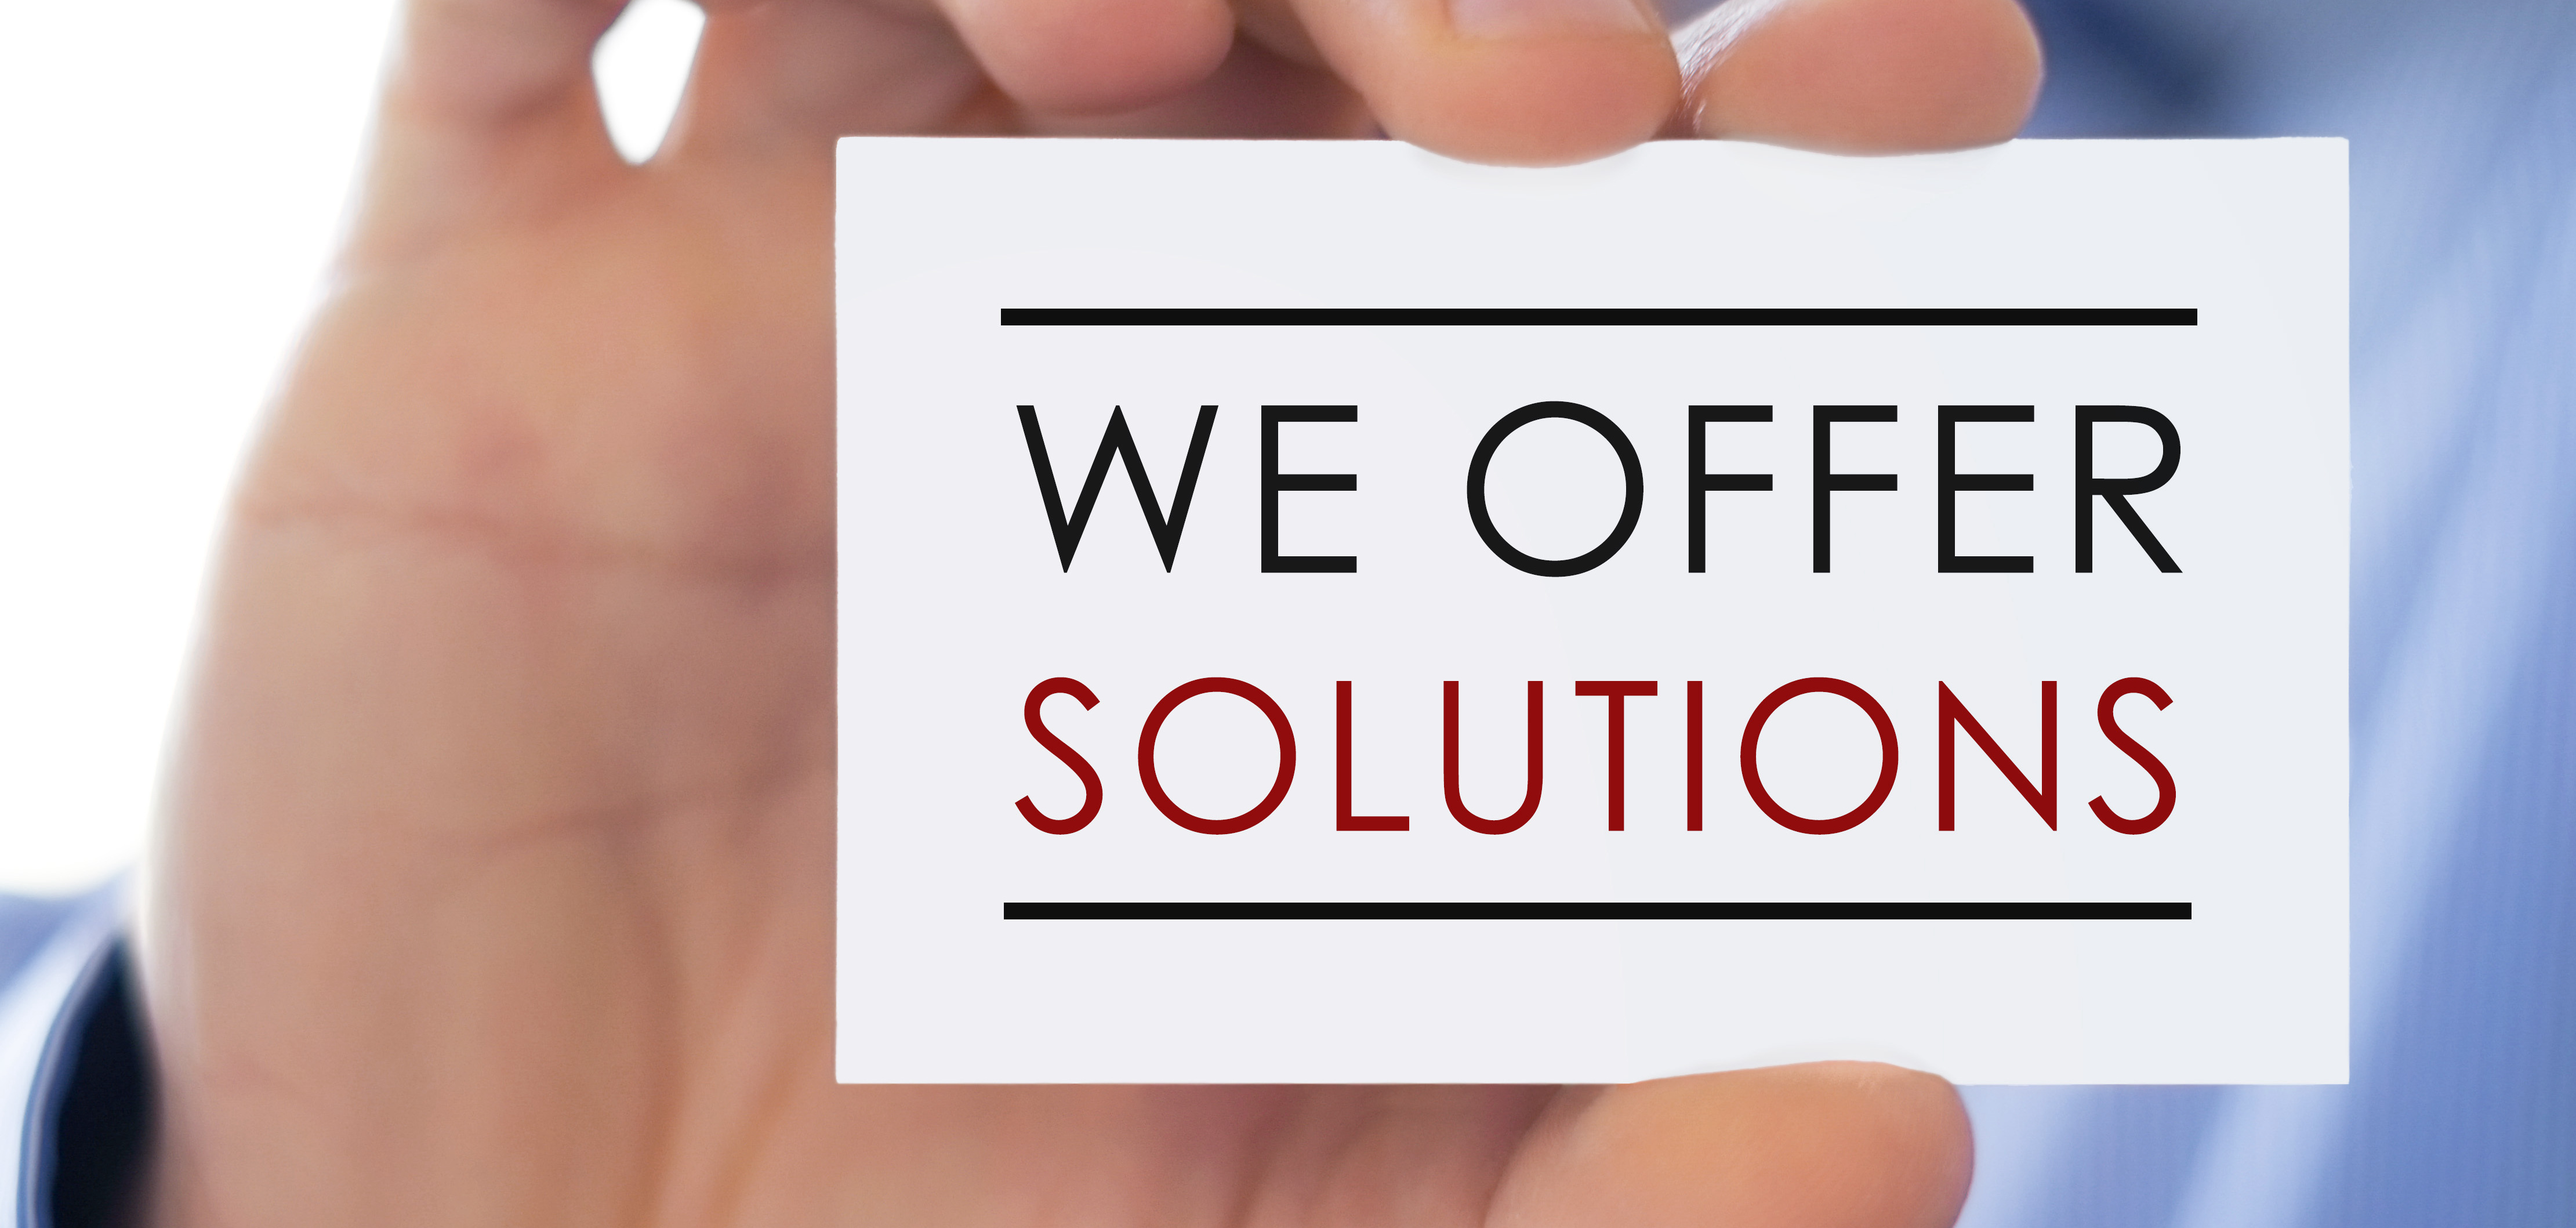 We offer solutions card held by hand